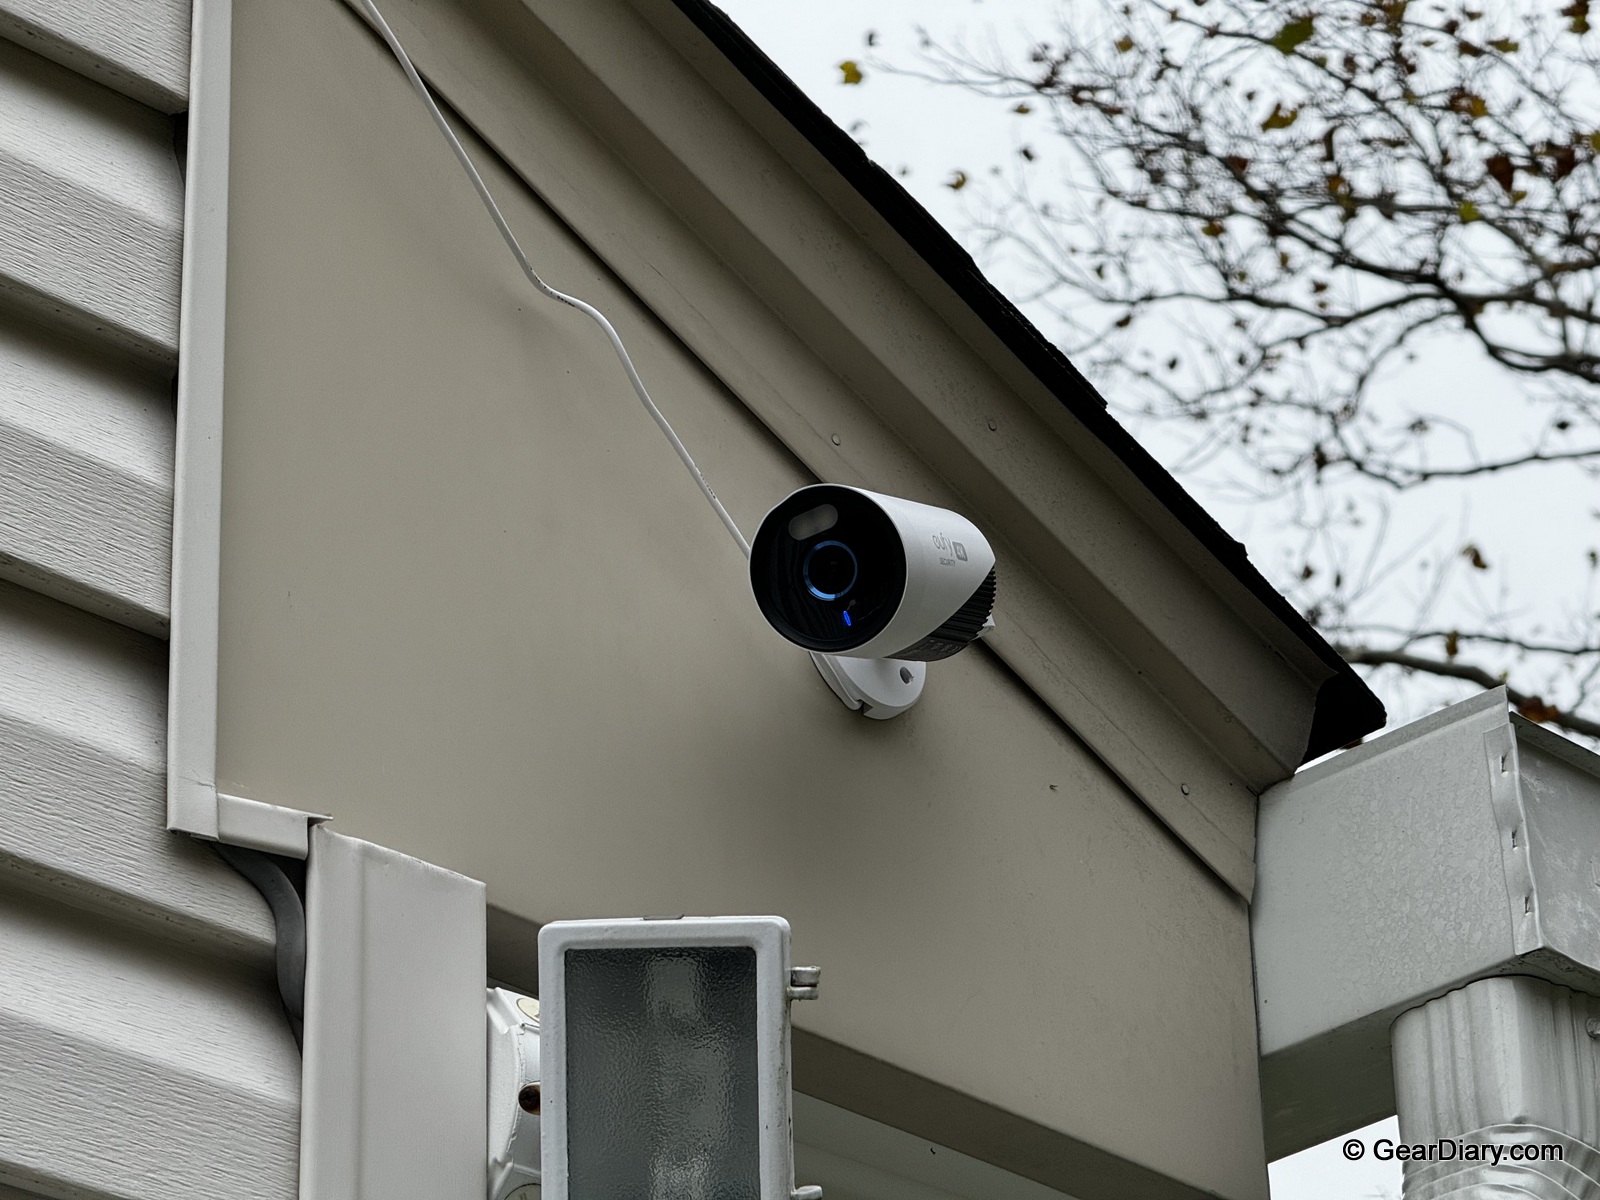 EufyCam E330 (Professional) 4-Cam Kit Review: A Cost-Effective Way to Get Full Property Security Coverage